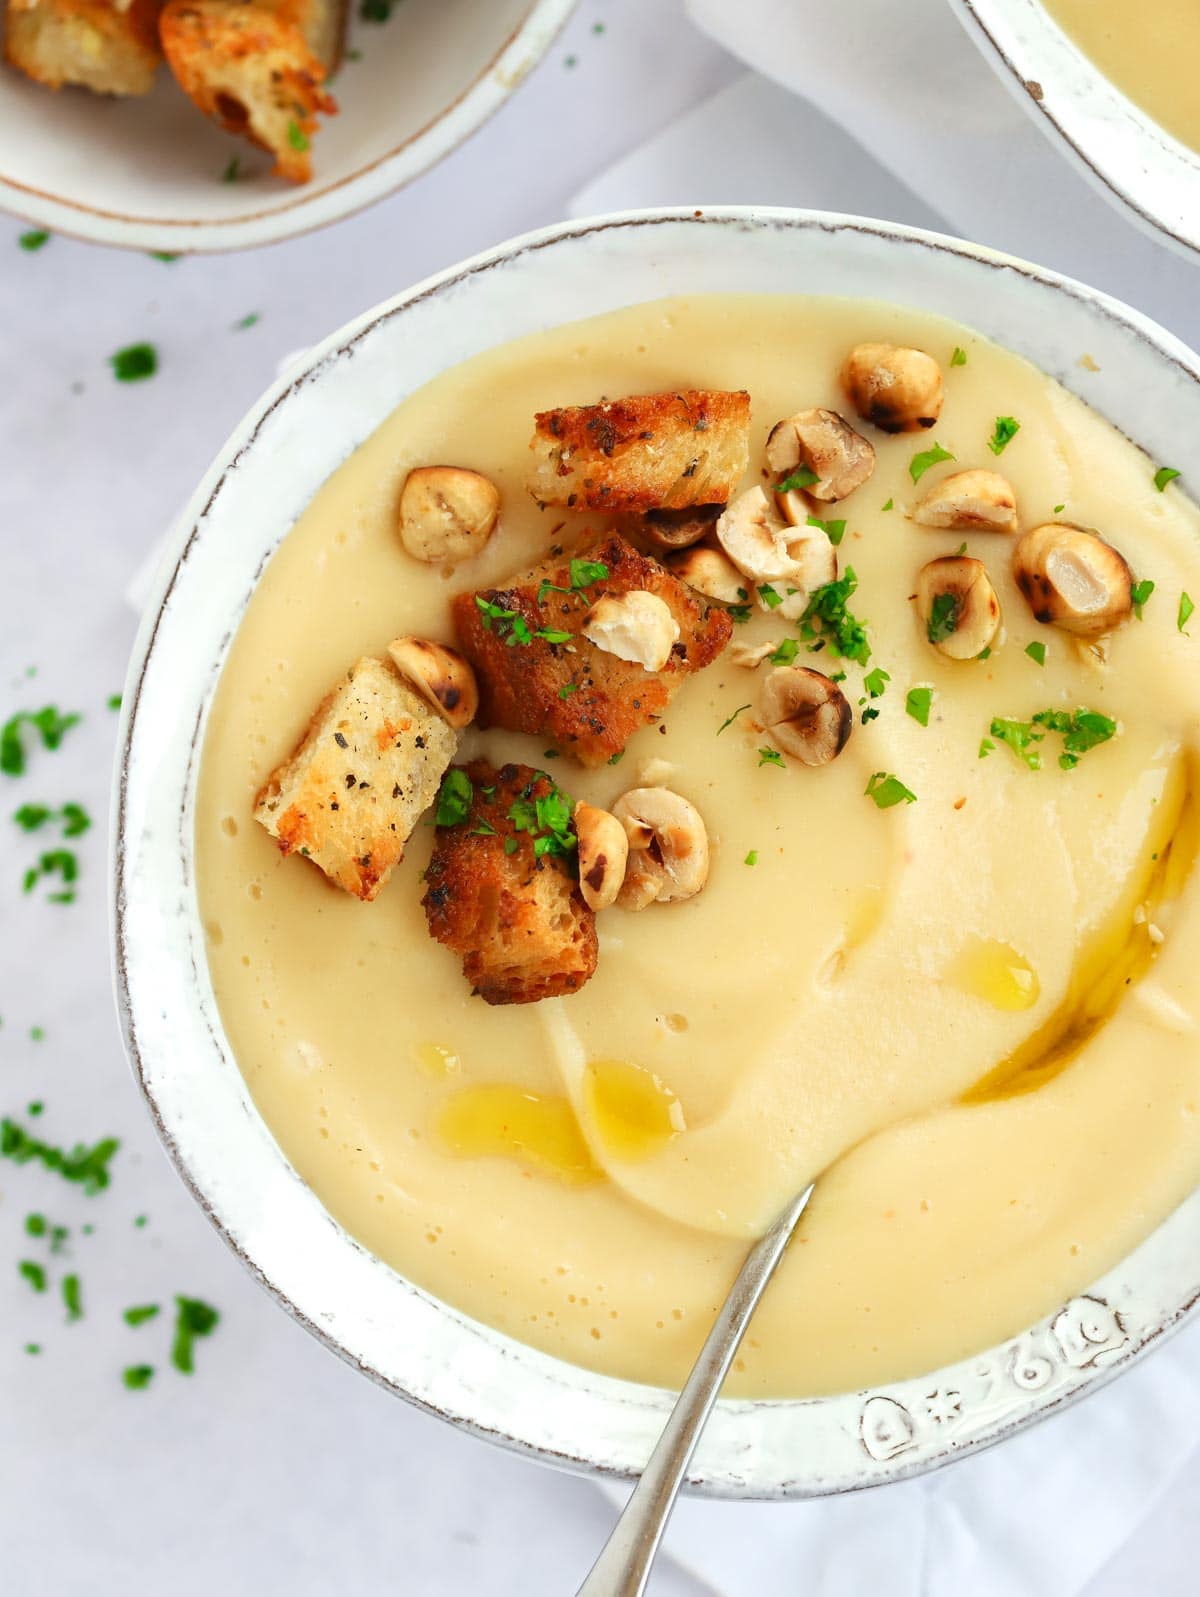 A bowl of Parsnip Soup with Garlic Bread Croutons onto.